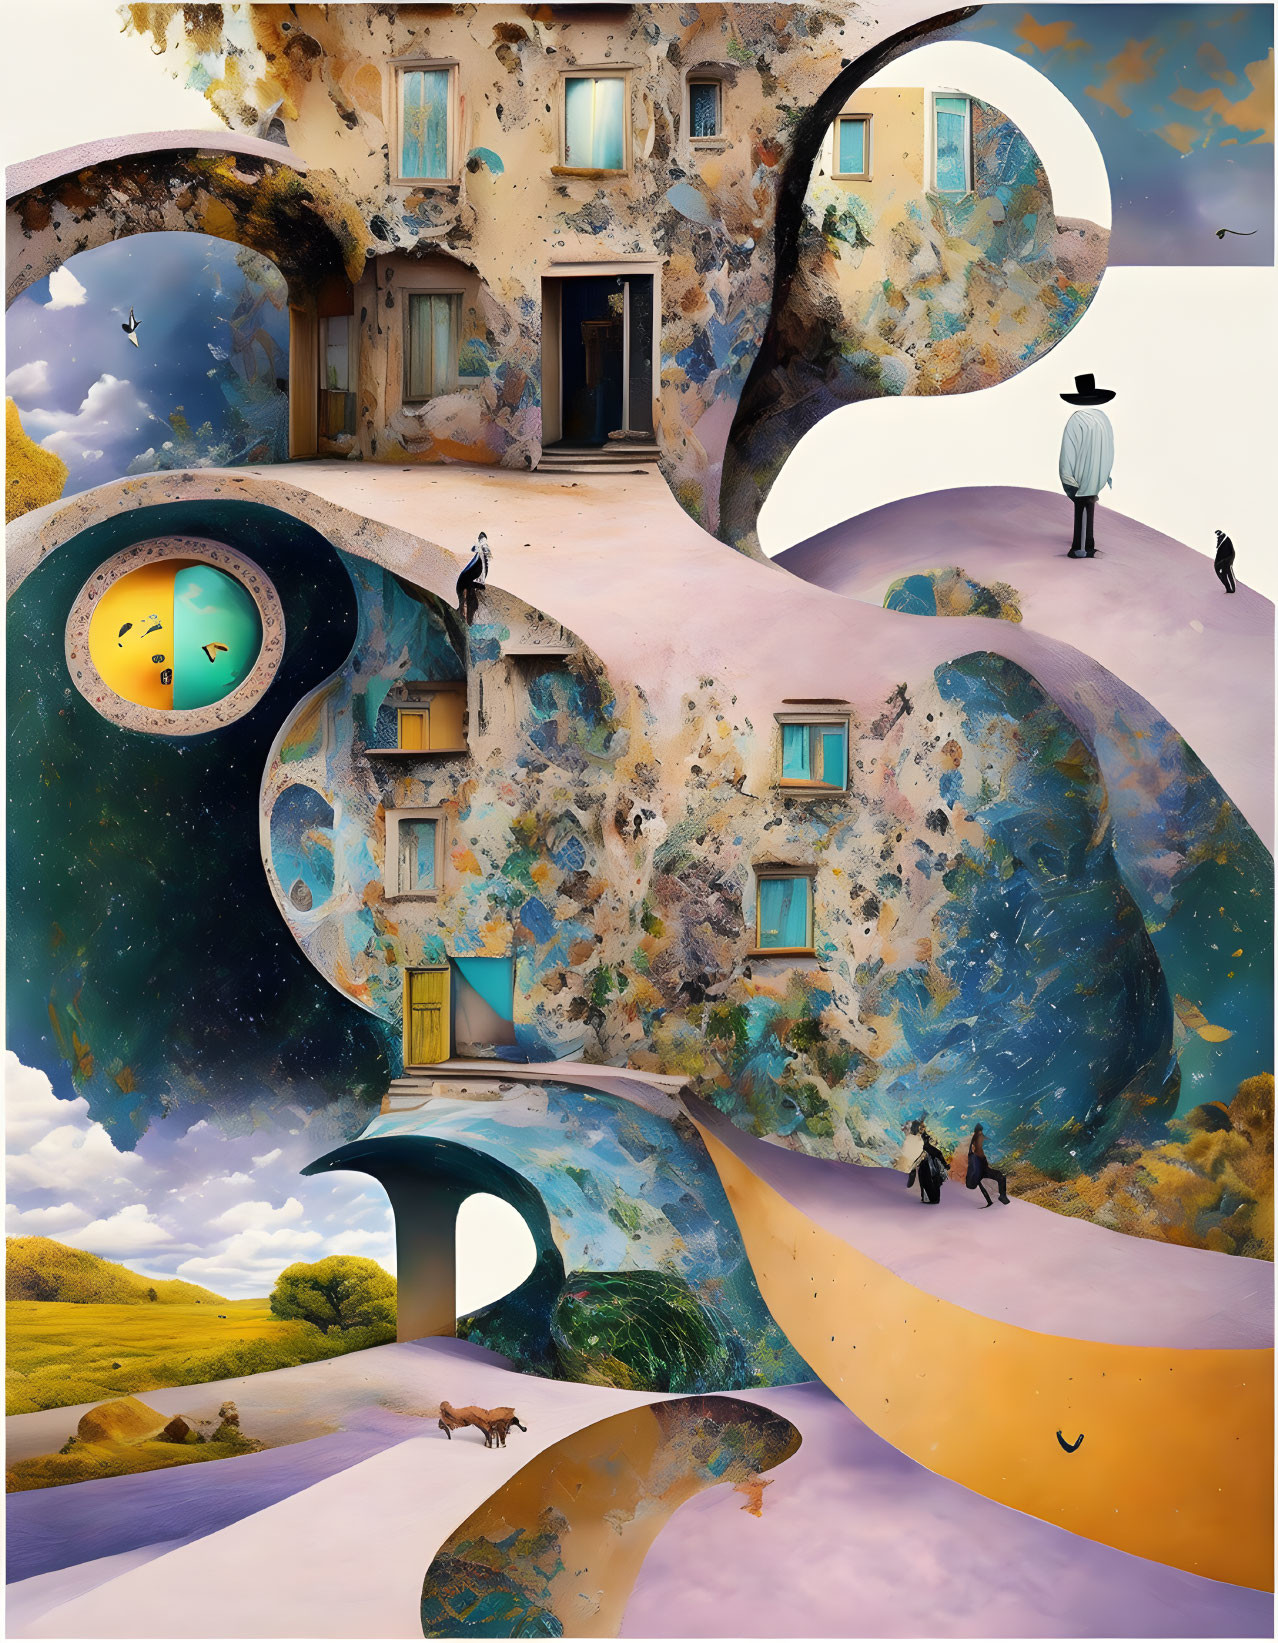 Surreal Landscape with Curving Architectural Forms and Figures